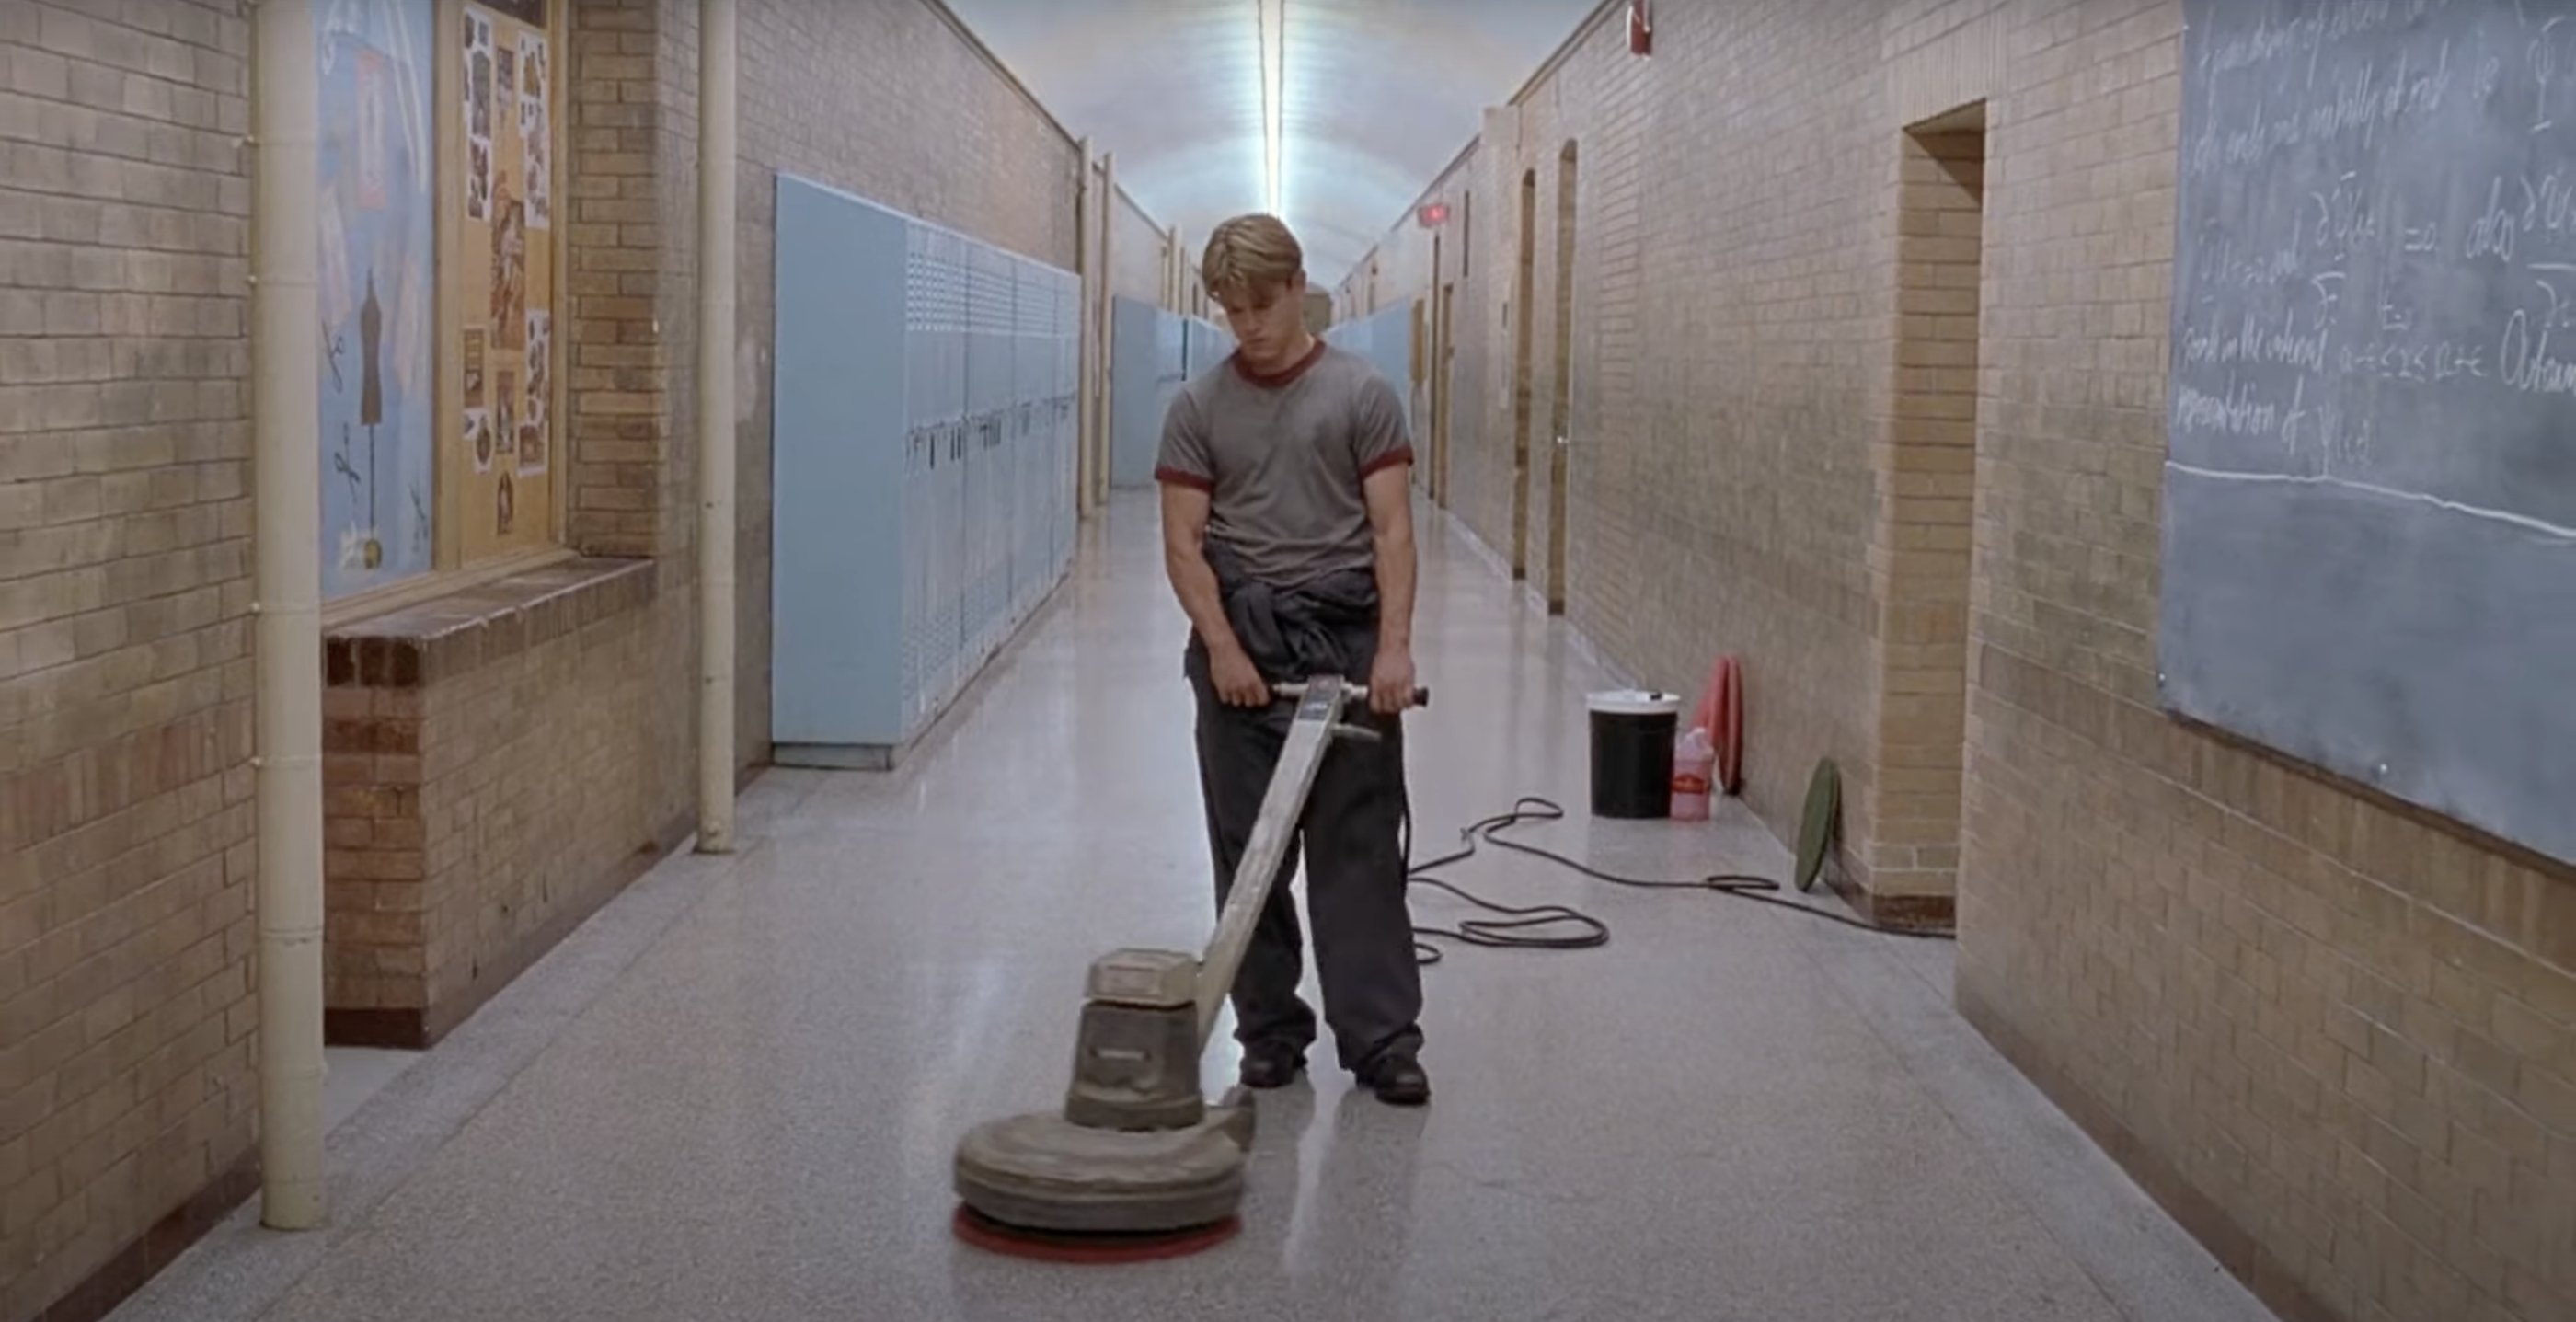 Matt Damon as Will in &quot;Good Will Hunting&quot; cleans the floors of a college as a janitor